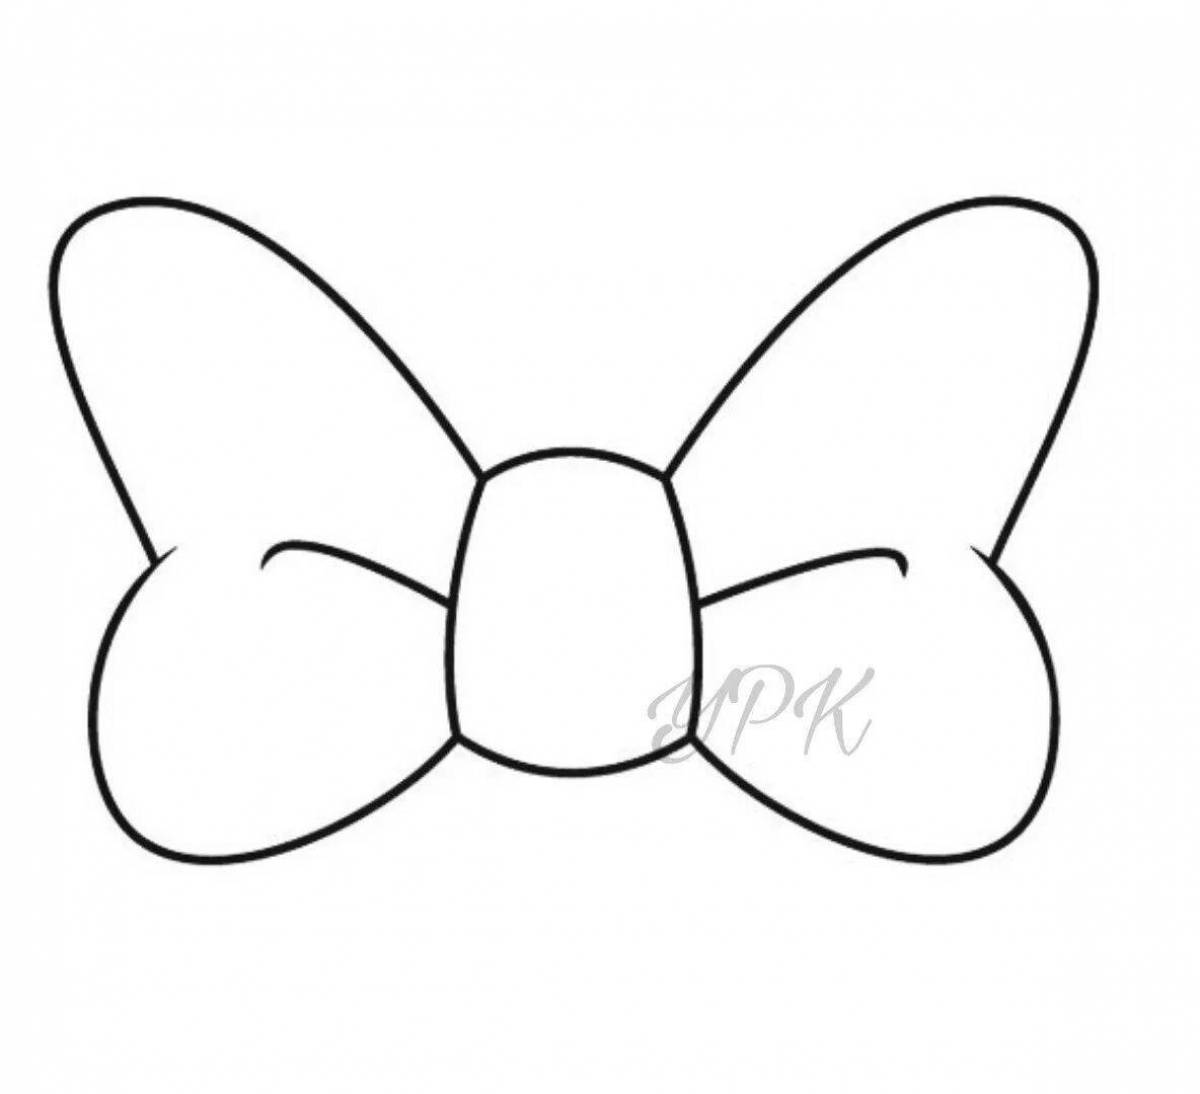 Creative bow coloring for kids